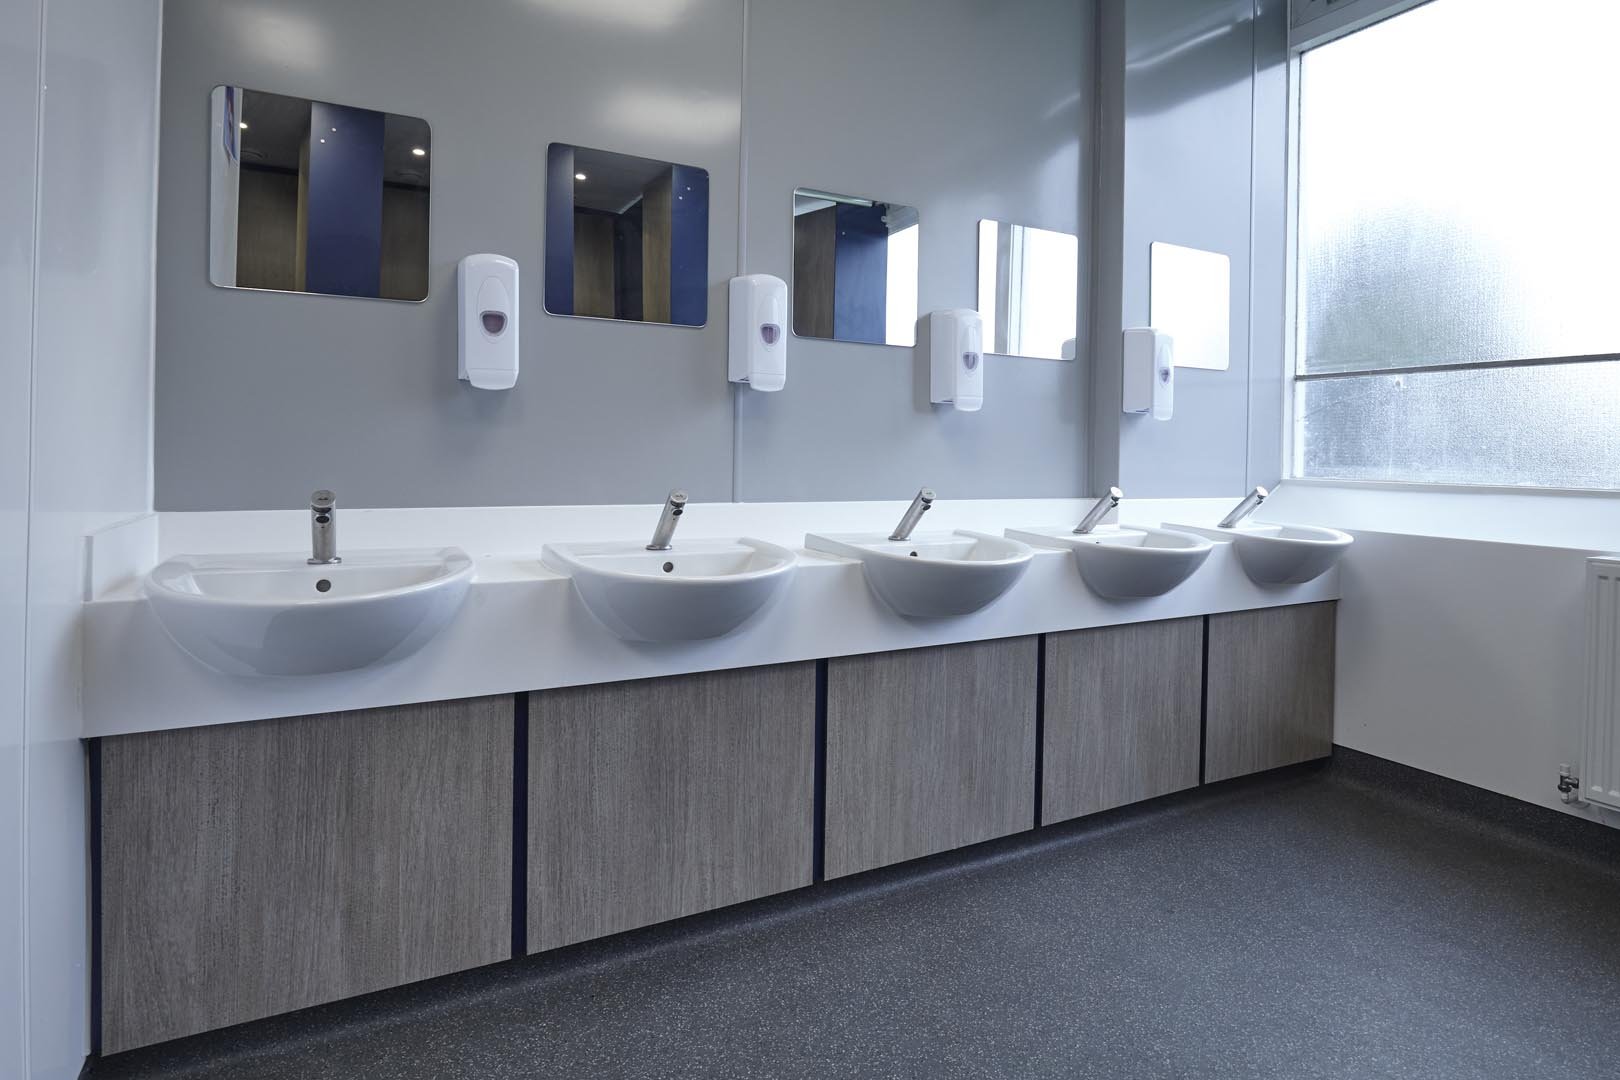 row of sinks on a vanity unit in woodgrain and mirrors at collingwood college.jpg